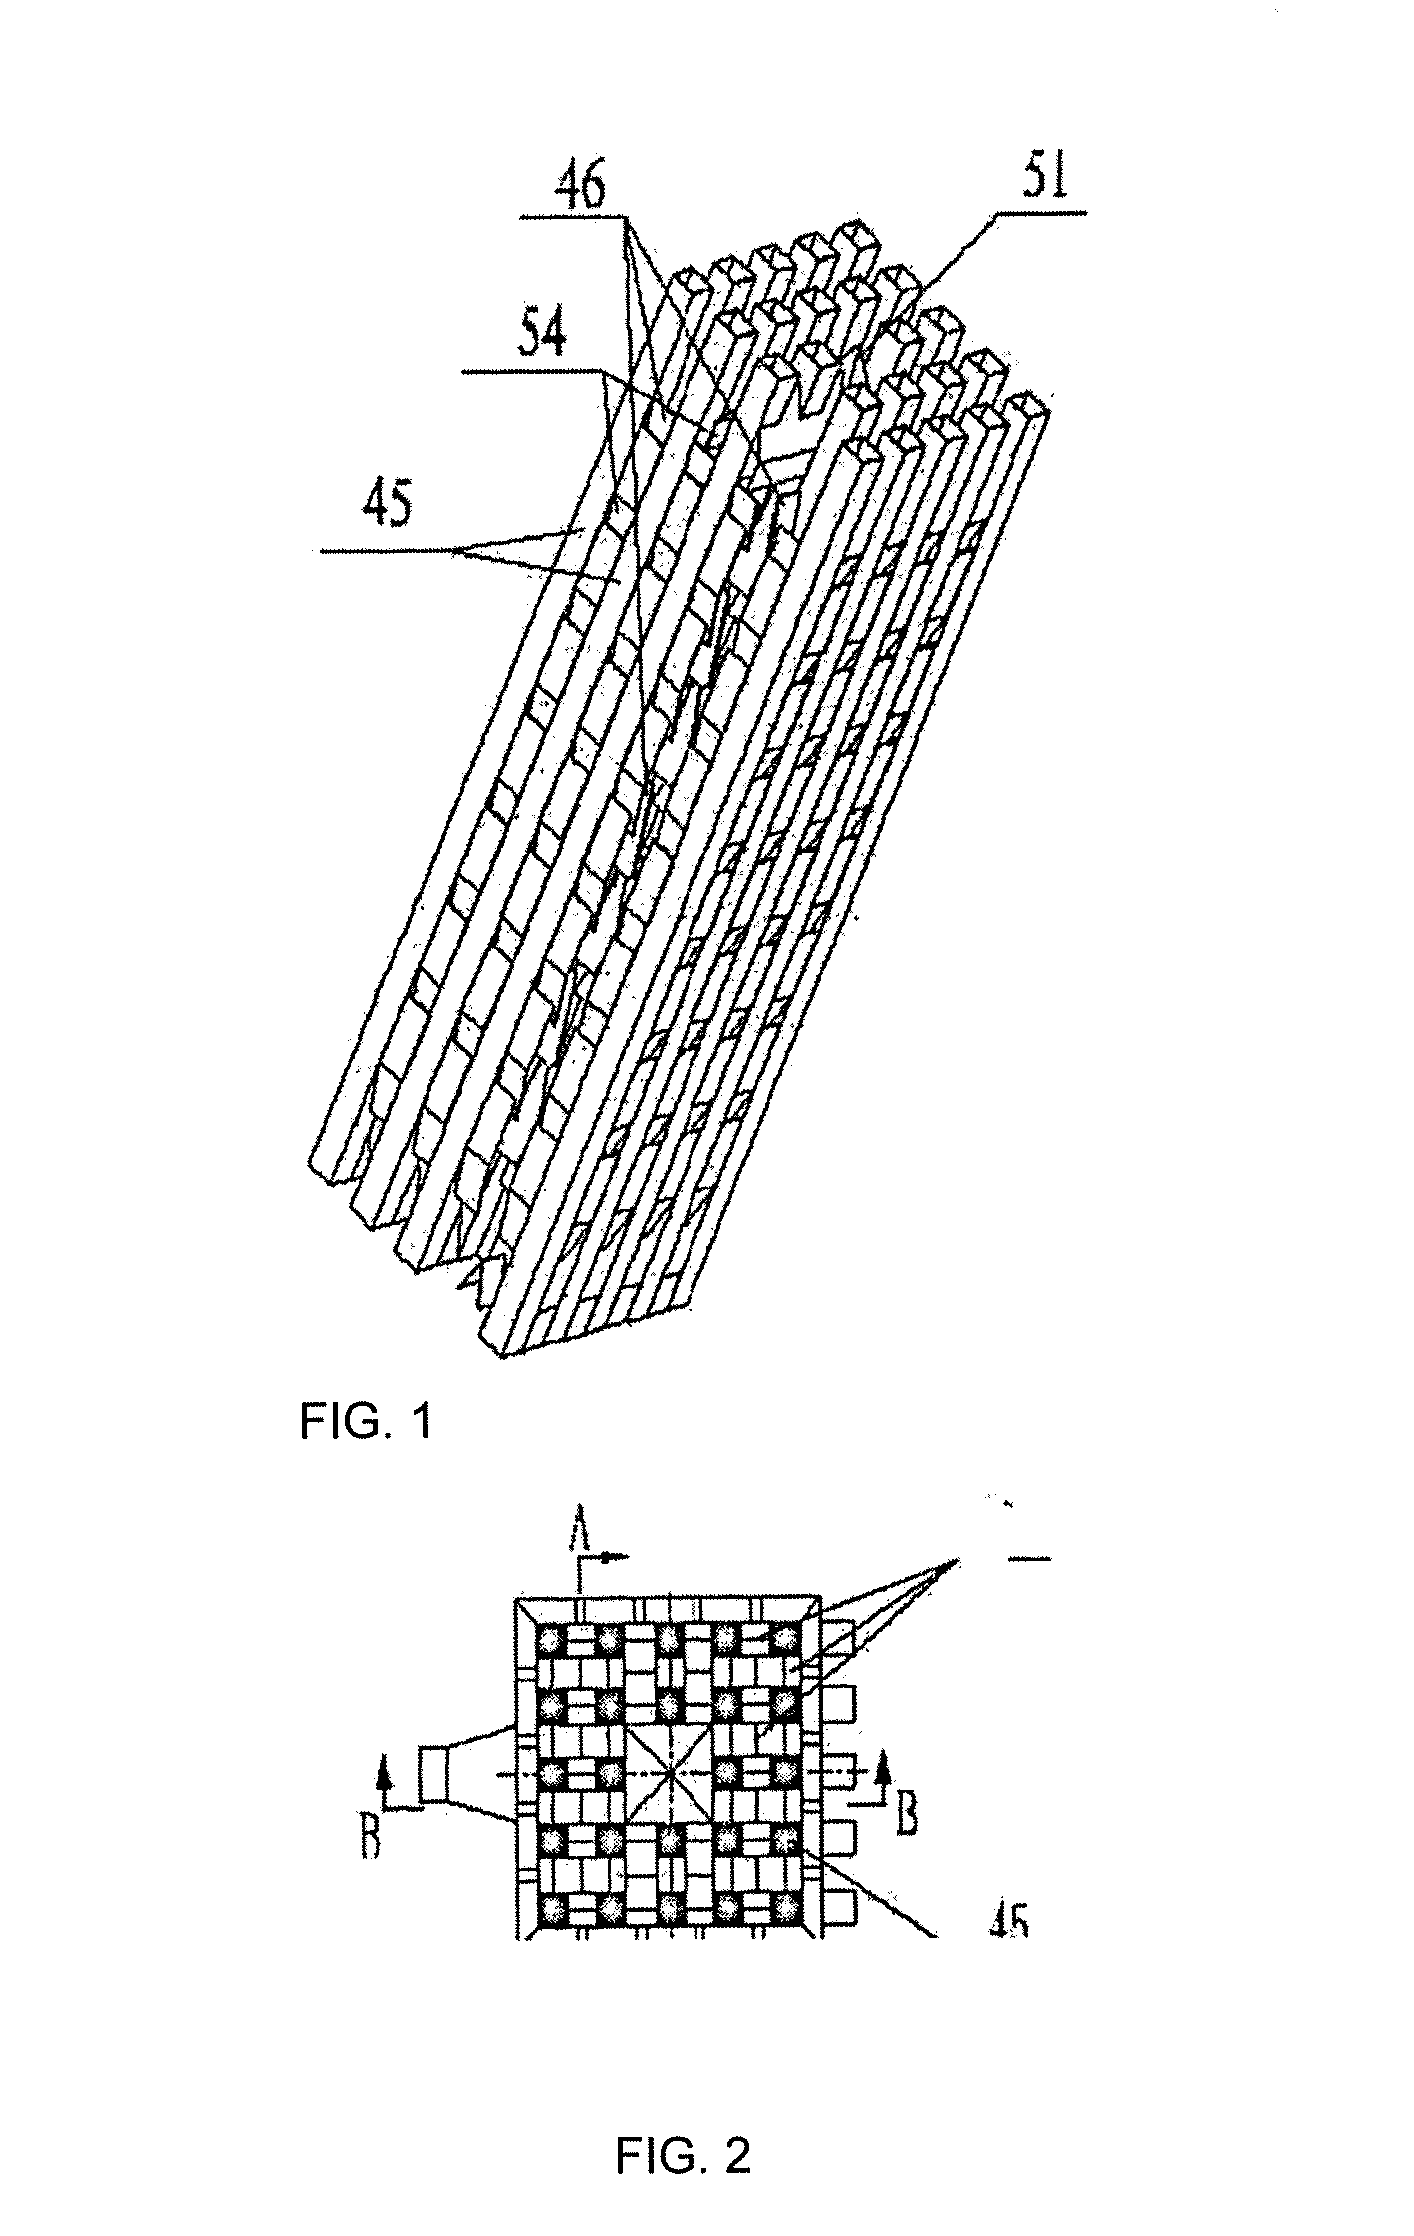 Apparatus and system for manufacturing quality coal products